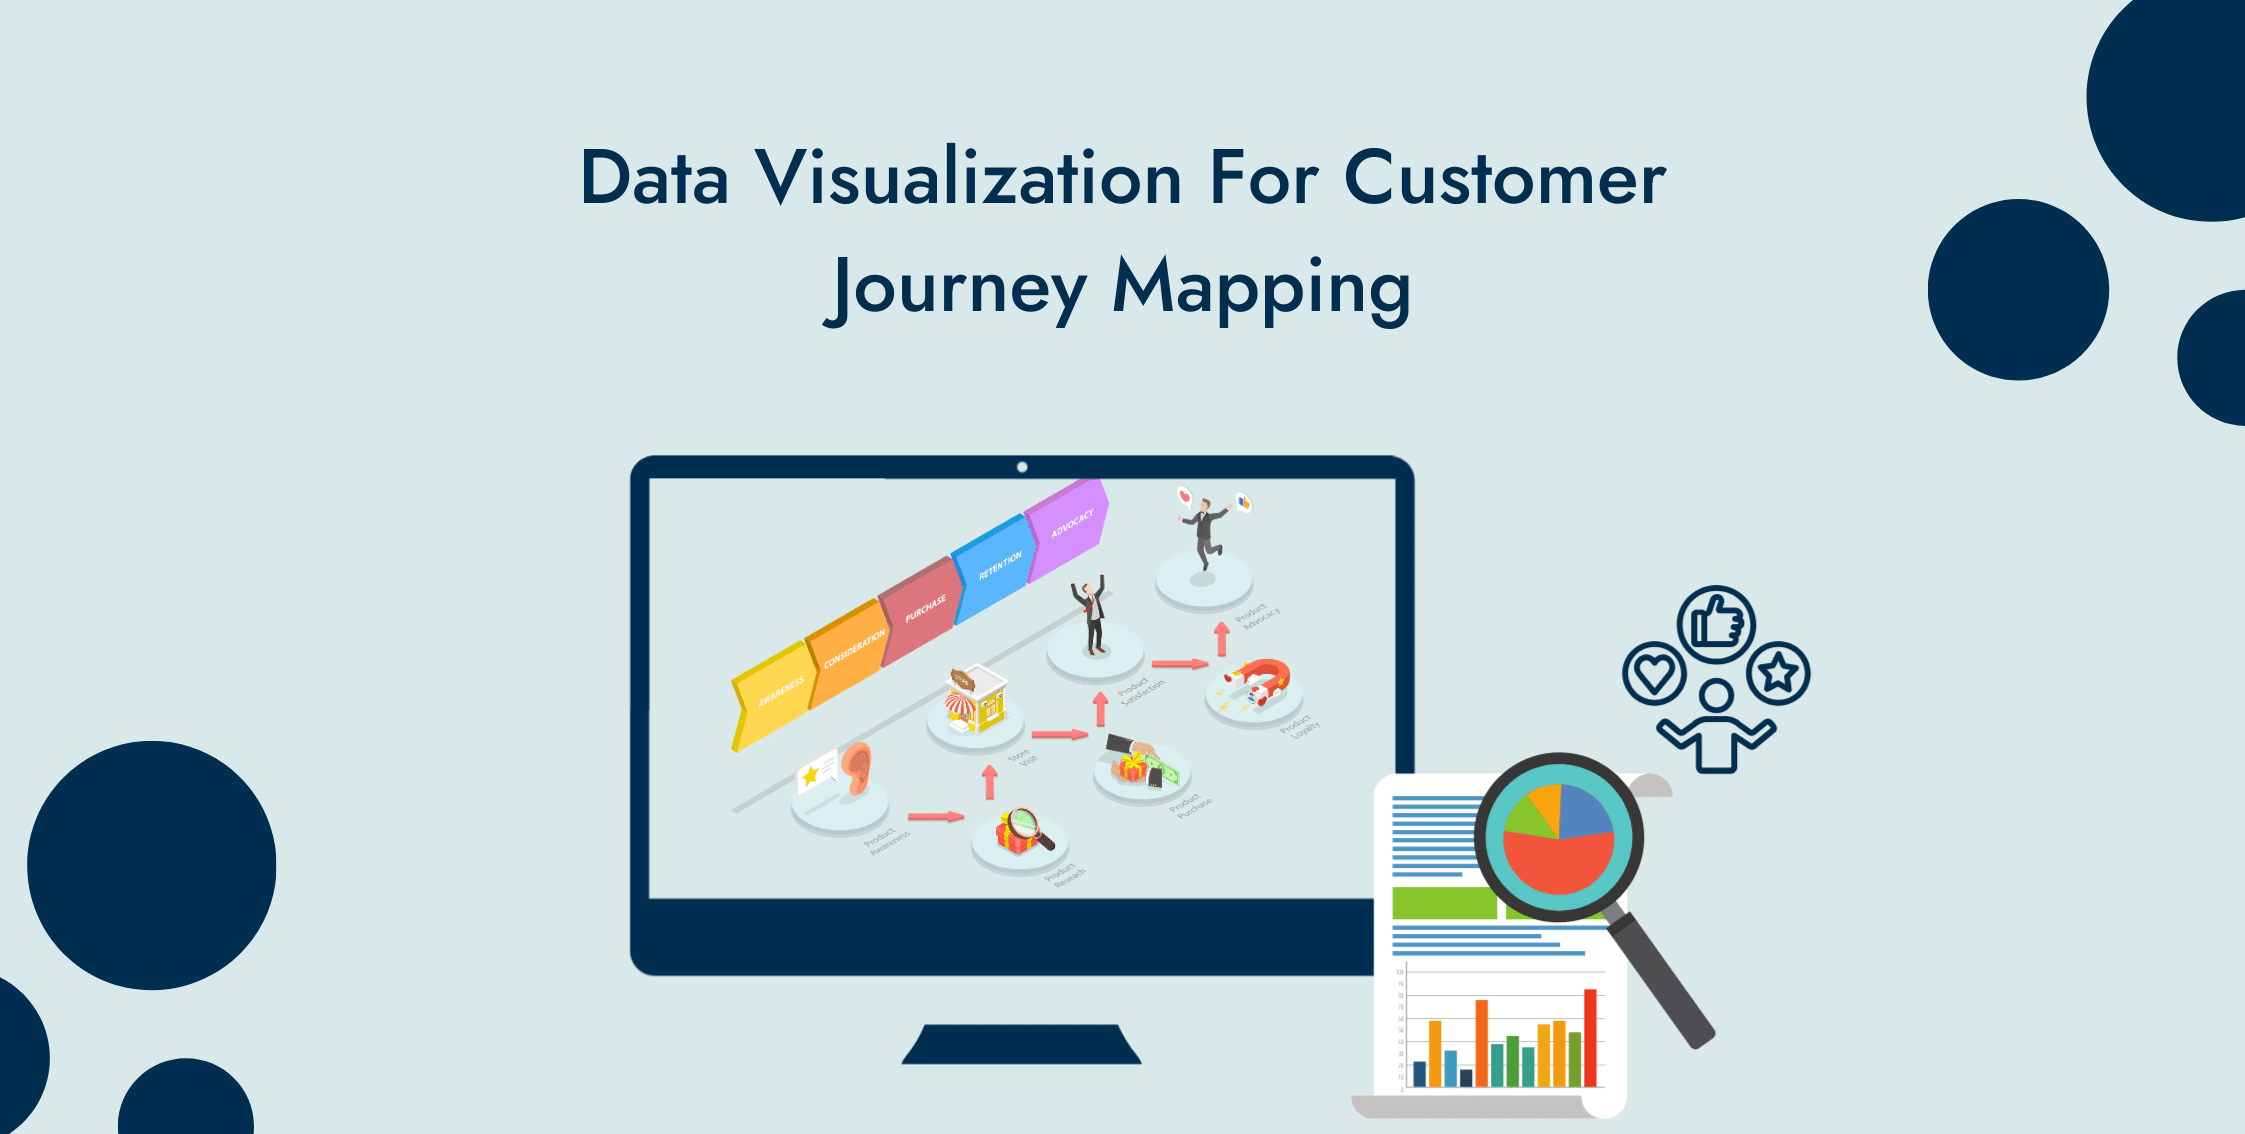 Data Visualization for Customer Journey Mapping